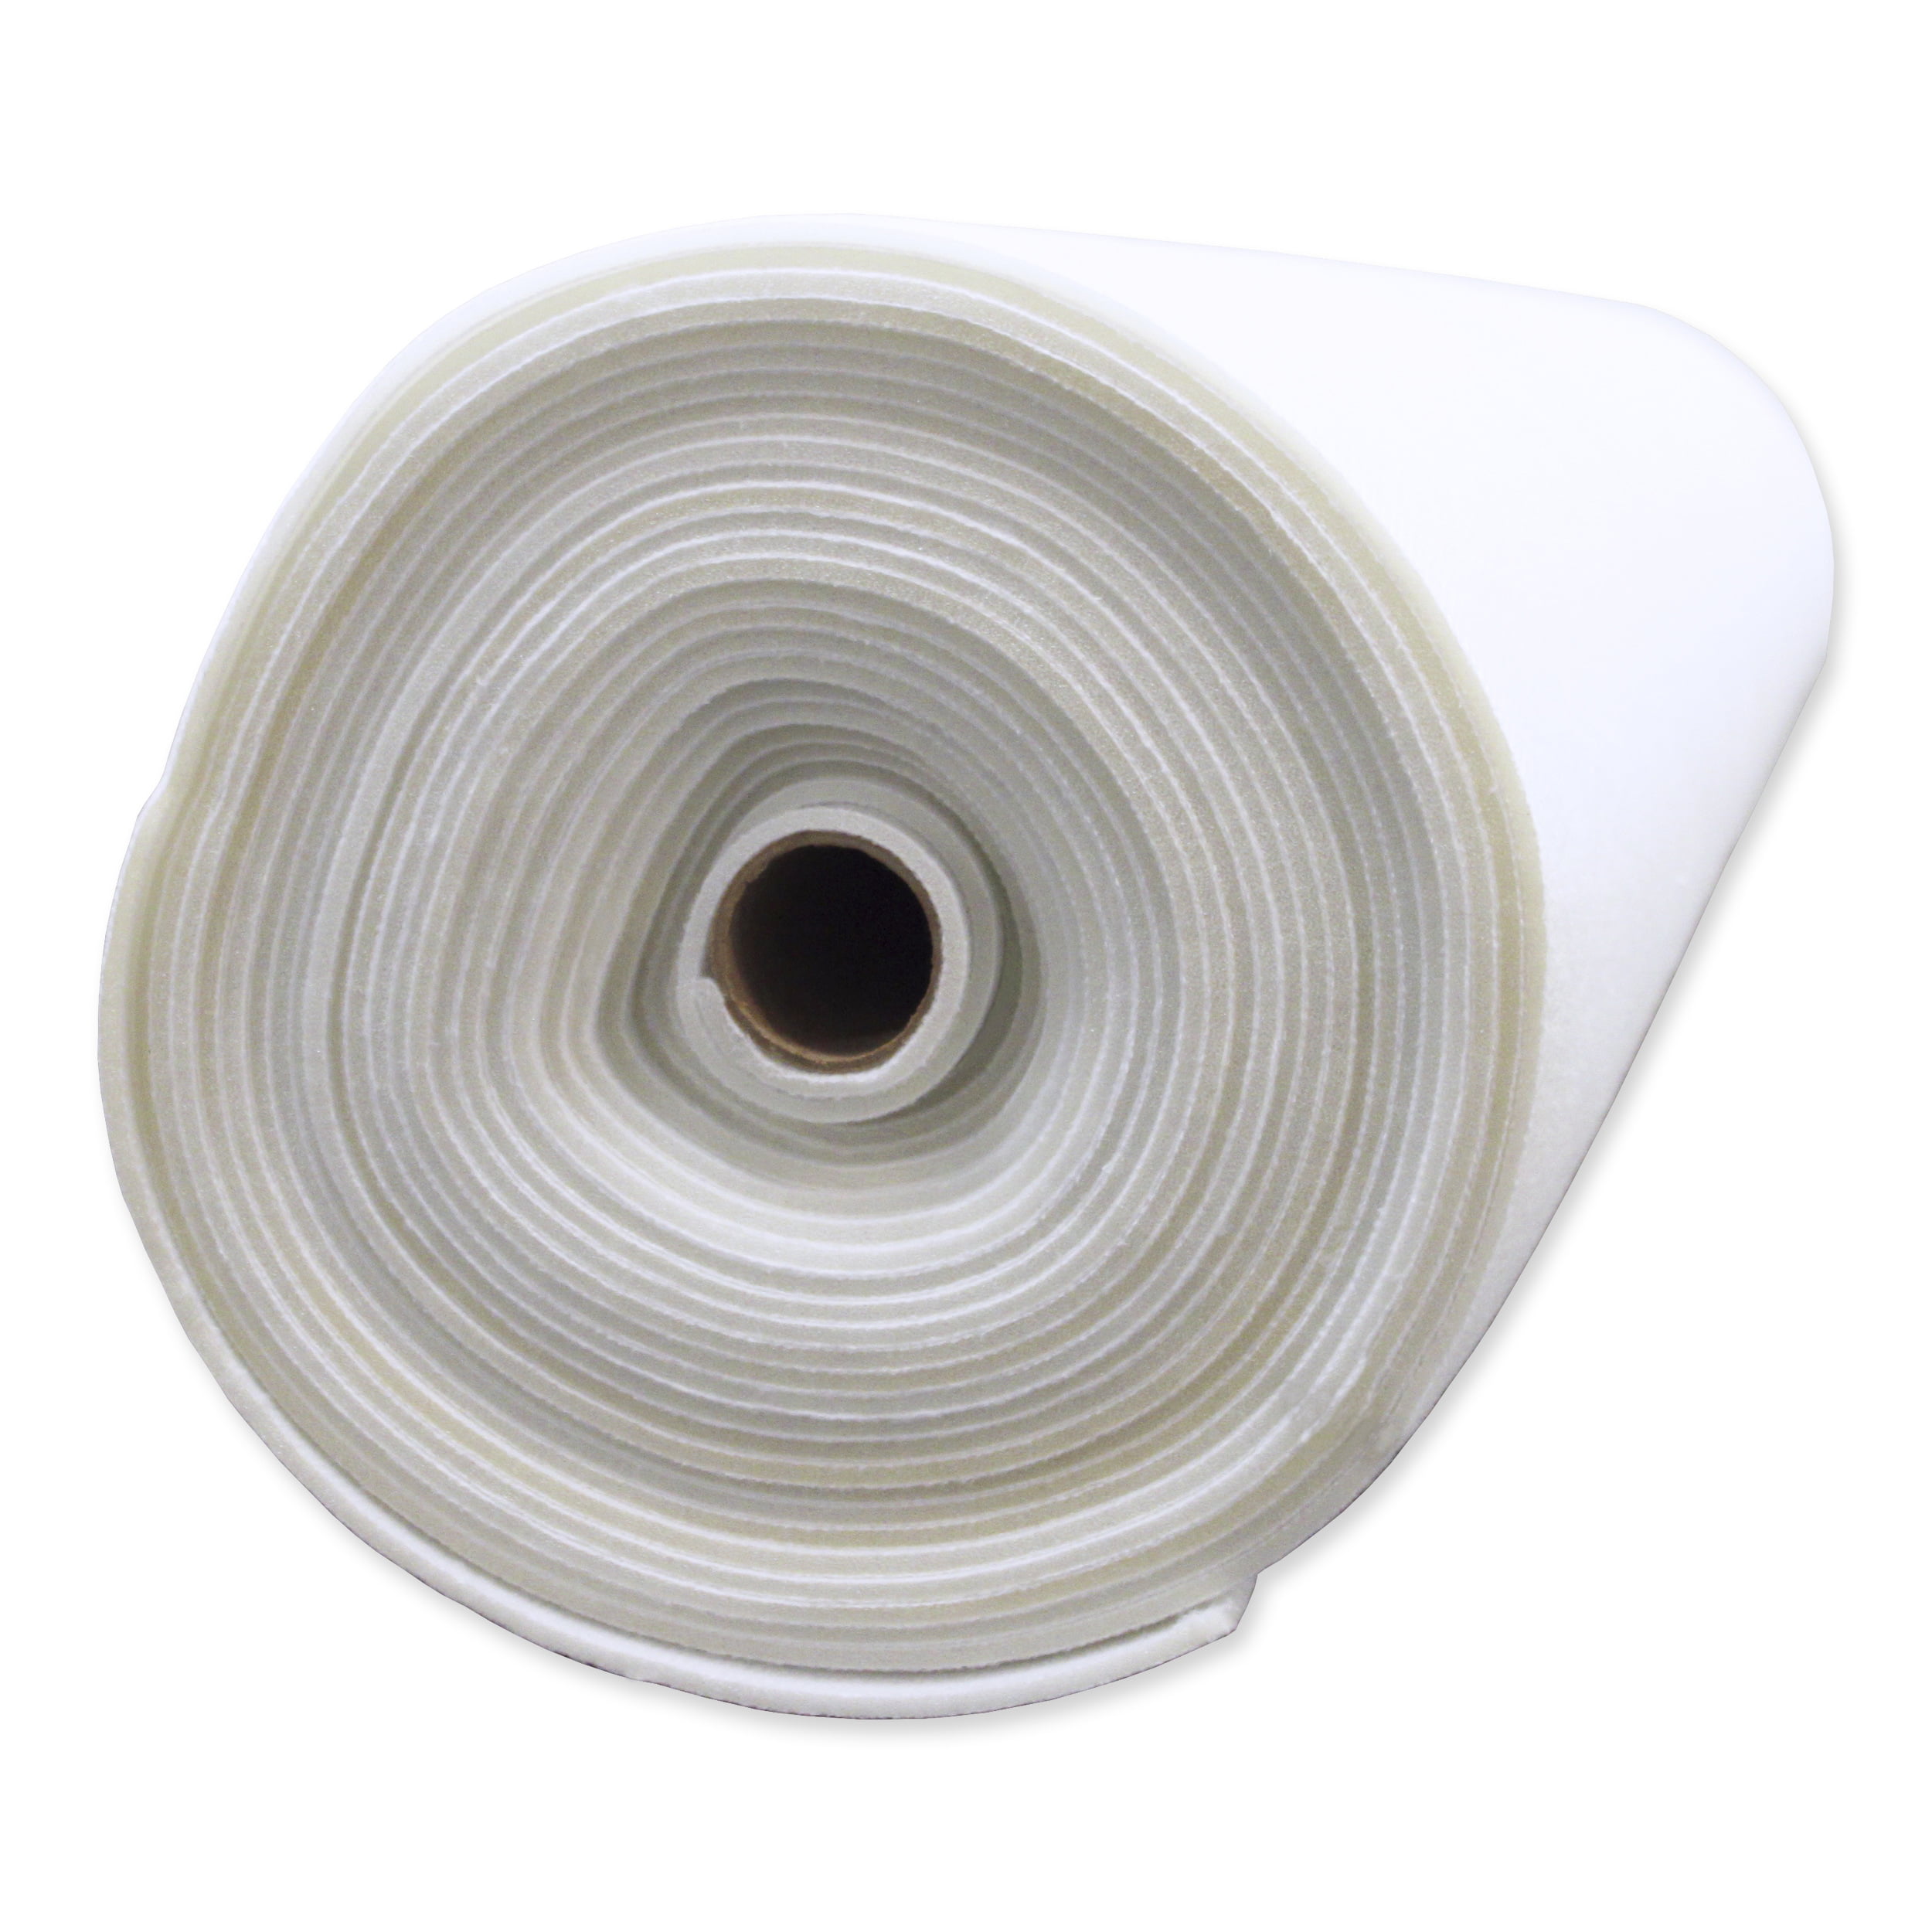 Pellon Fusible Polyester Batting, White. 60 x 6 Yards by the Bolt 1 Pack